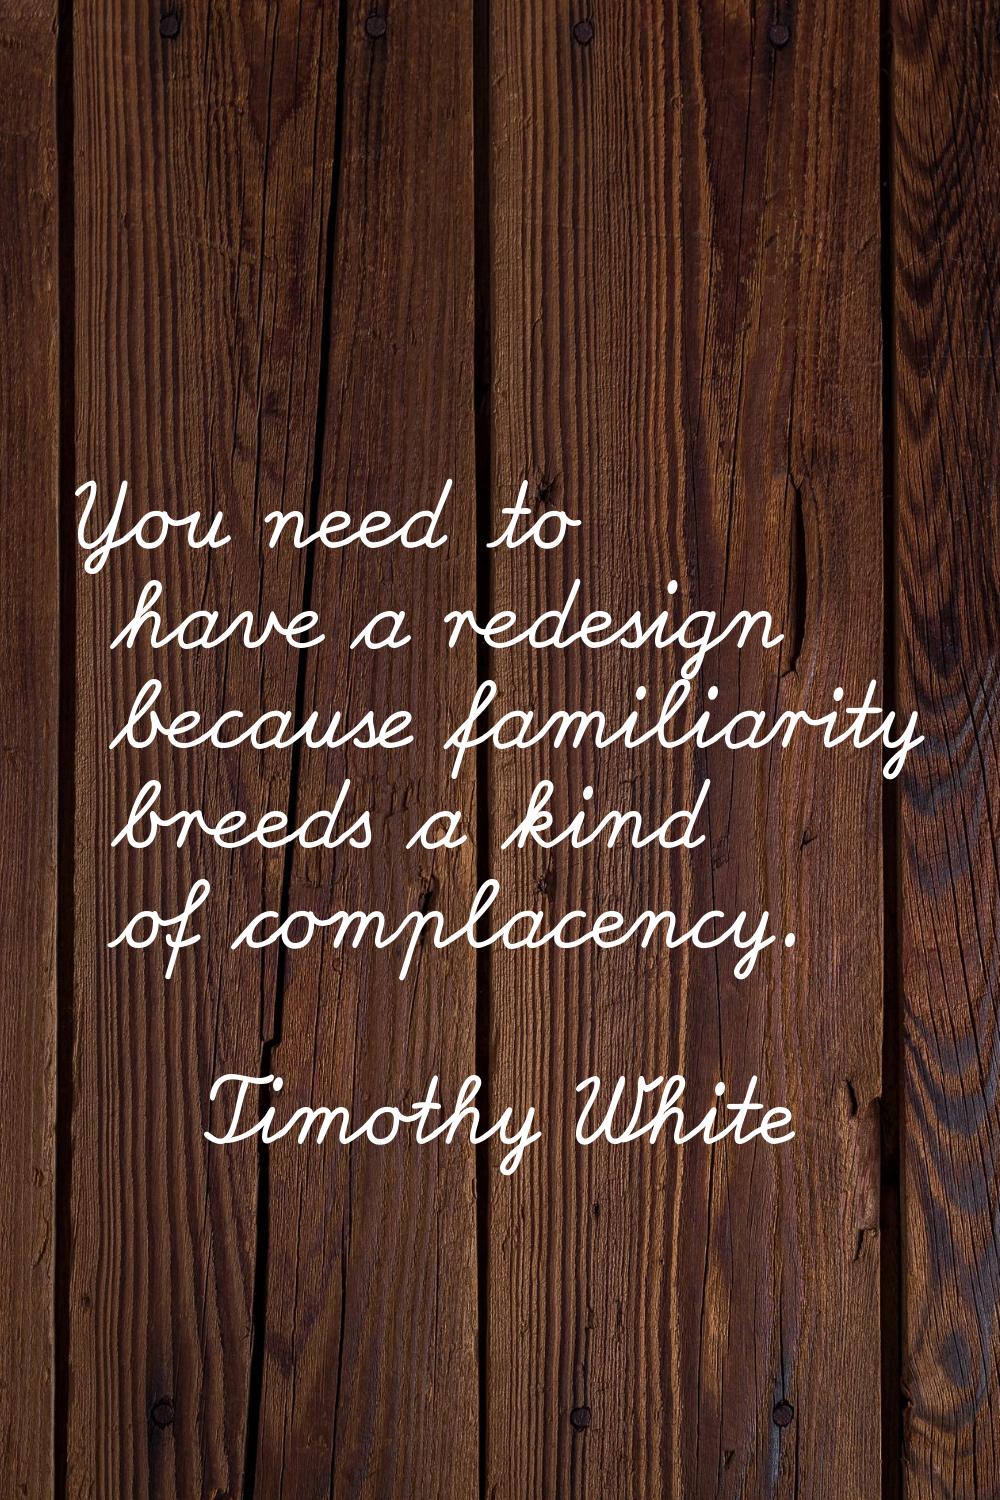 You need to have a redesign because familiarity breeds a kind of complacency.